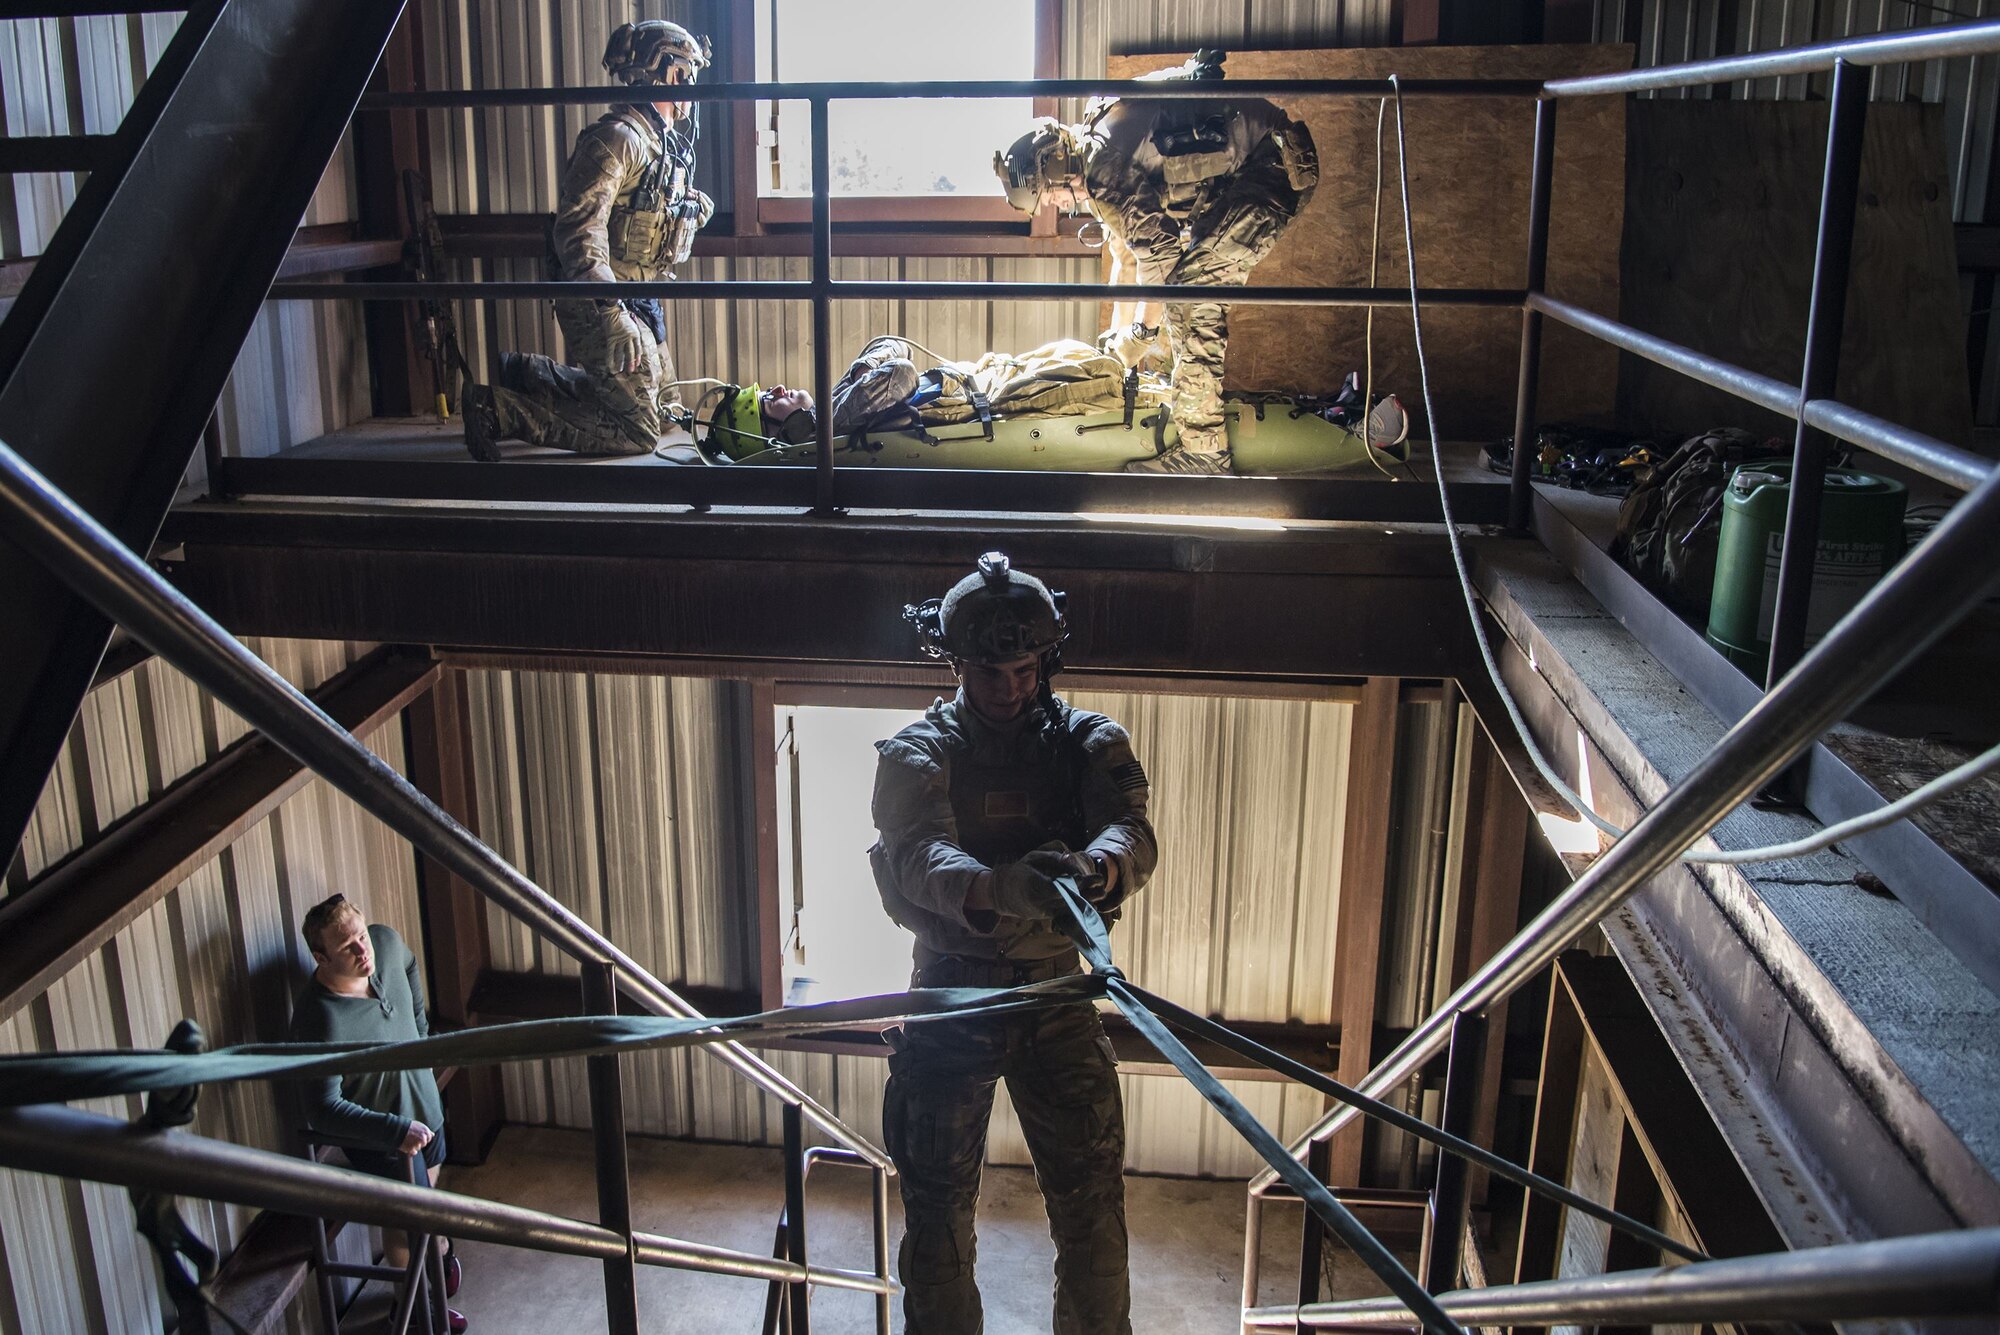 Pararescuemen from the 38th Rescue Squadron (RQS) perform rescue operations during a full mission profile exercise, Dec. 12, 2017, at Moody Air Force Base, Ga. During the training, the 38th RQS recovered victims while under enemy fire to prepare for future search and rescue missions and to assess their unit’s ability to work cohesively to accomplish the mission. (U.S. Air Force photo by Airman Eugene Oliver)